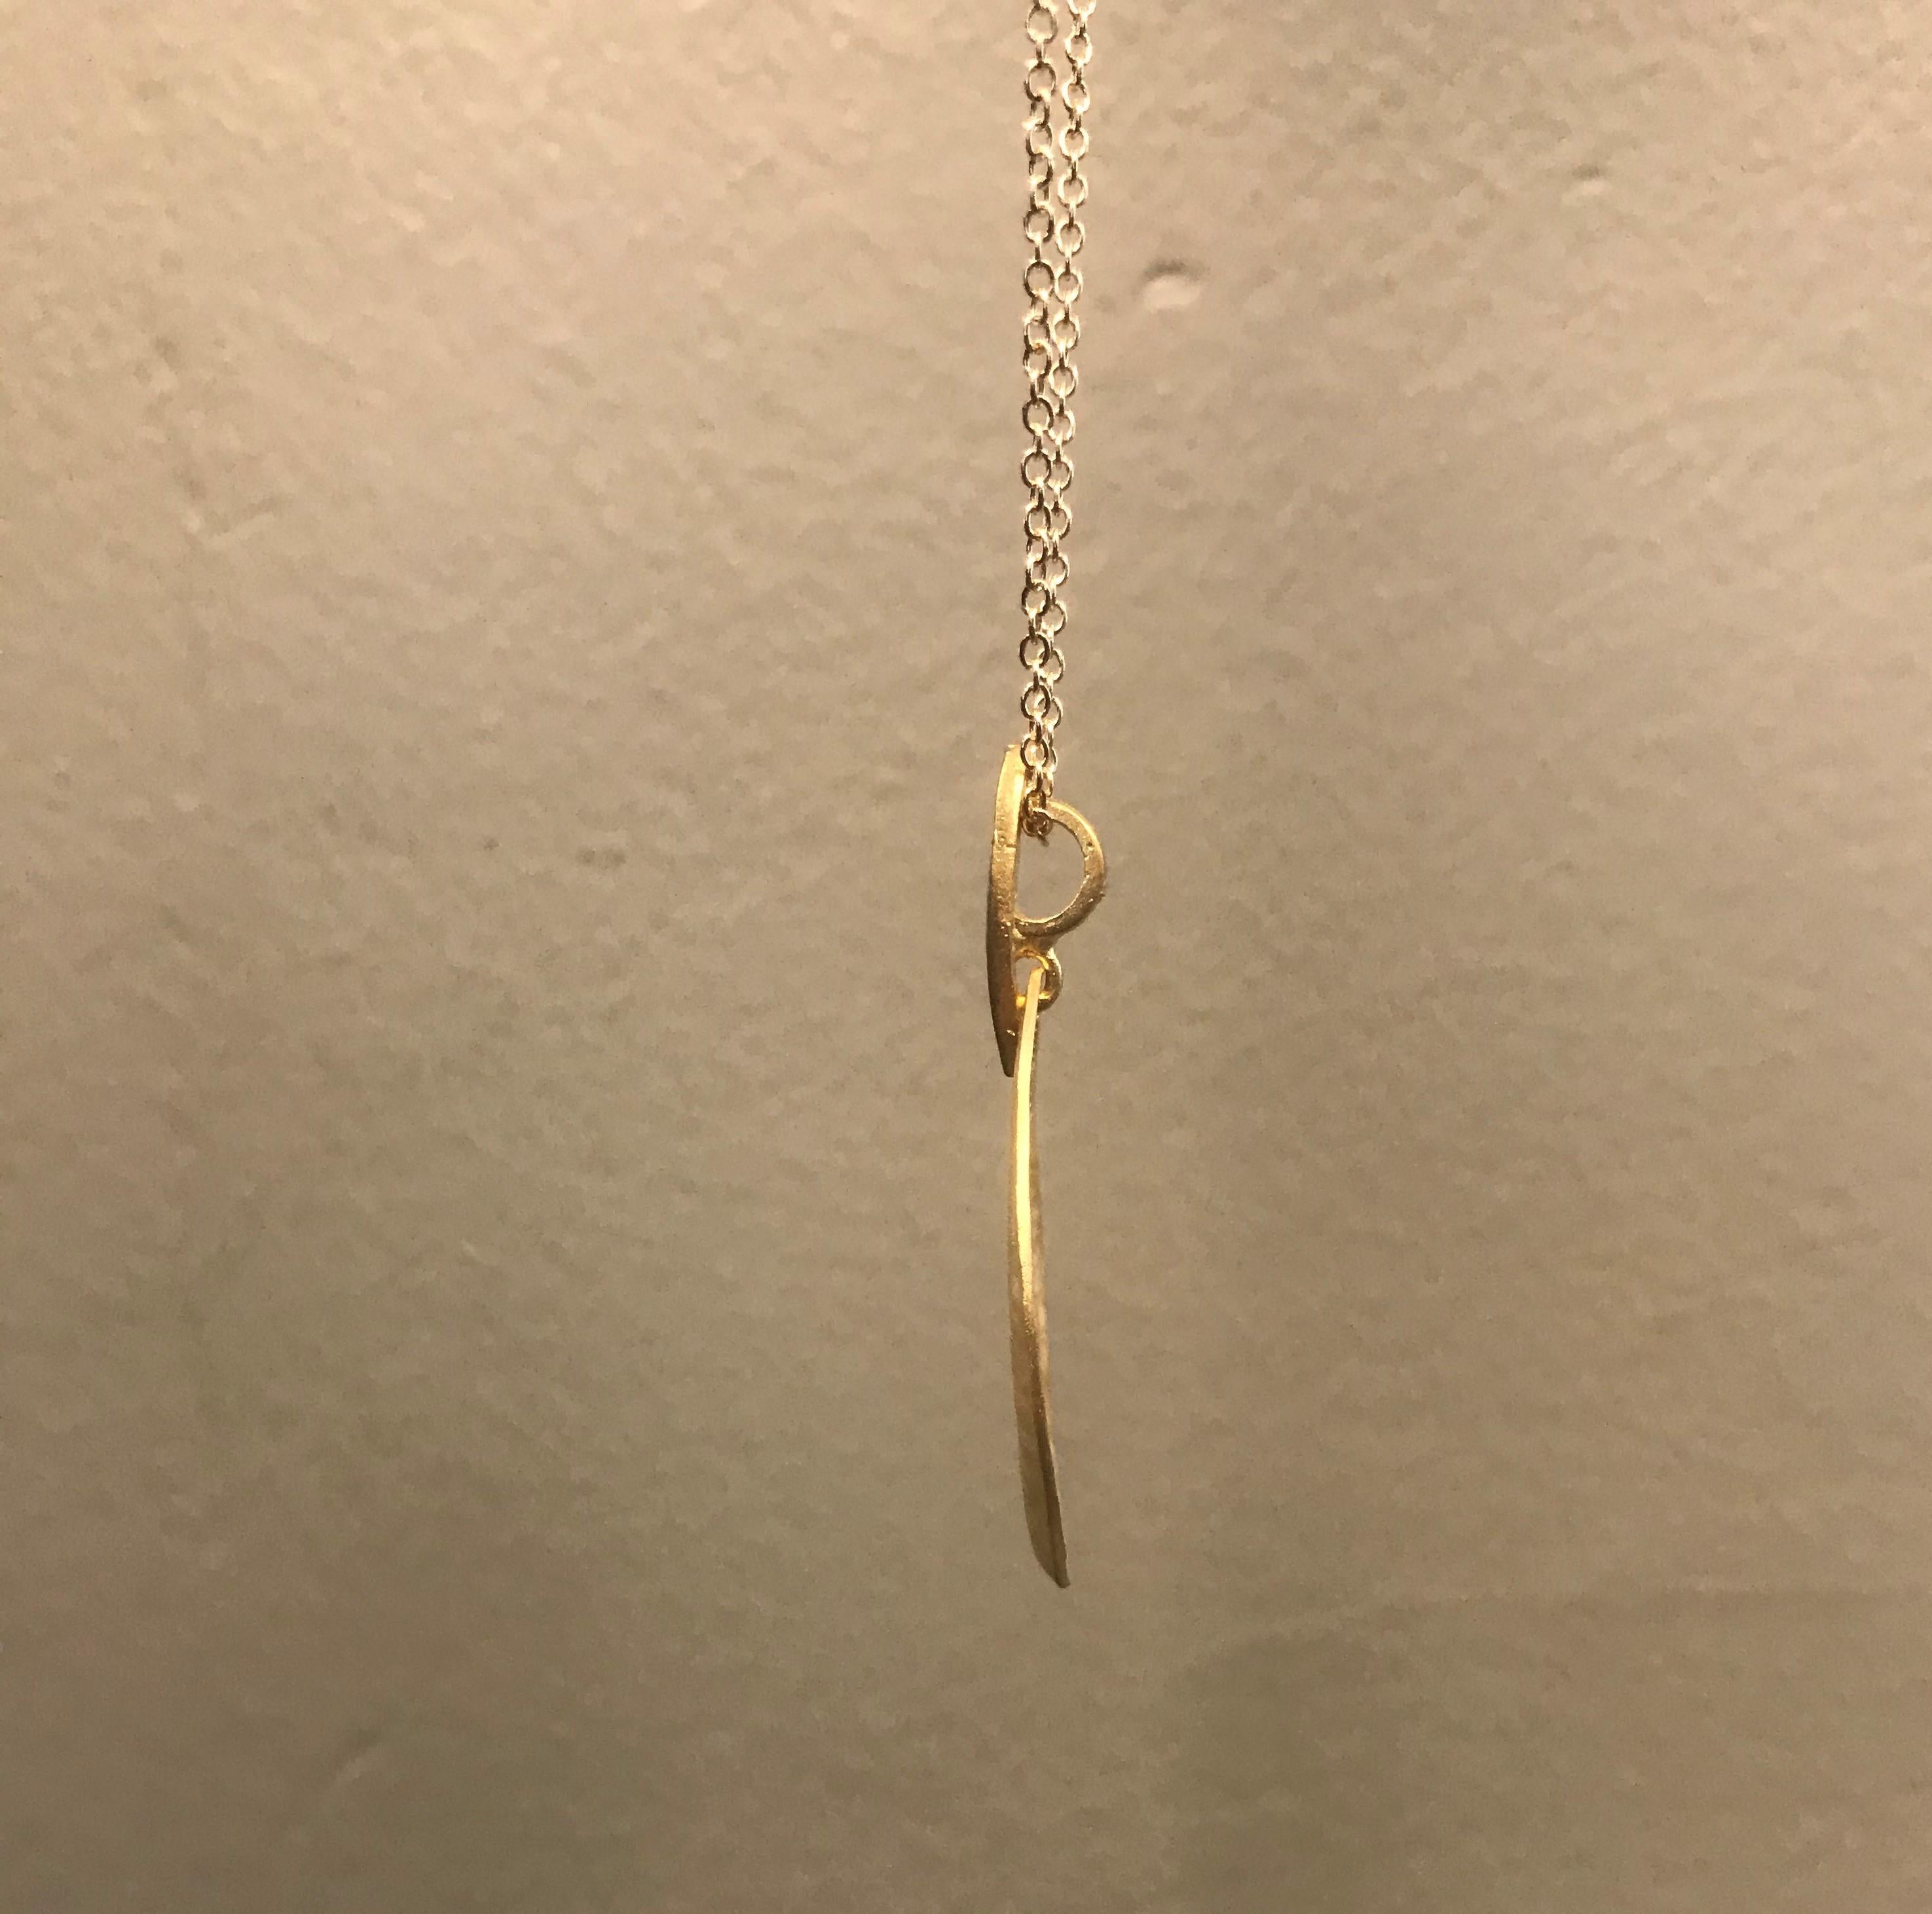 Handcrafted 14 Karat Yellow Gold Hammered Pendant Accented with Diamonds In New Condition For Sale In Great Neck, NY